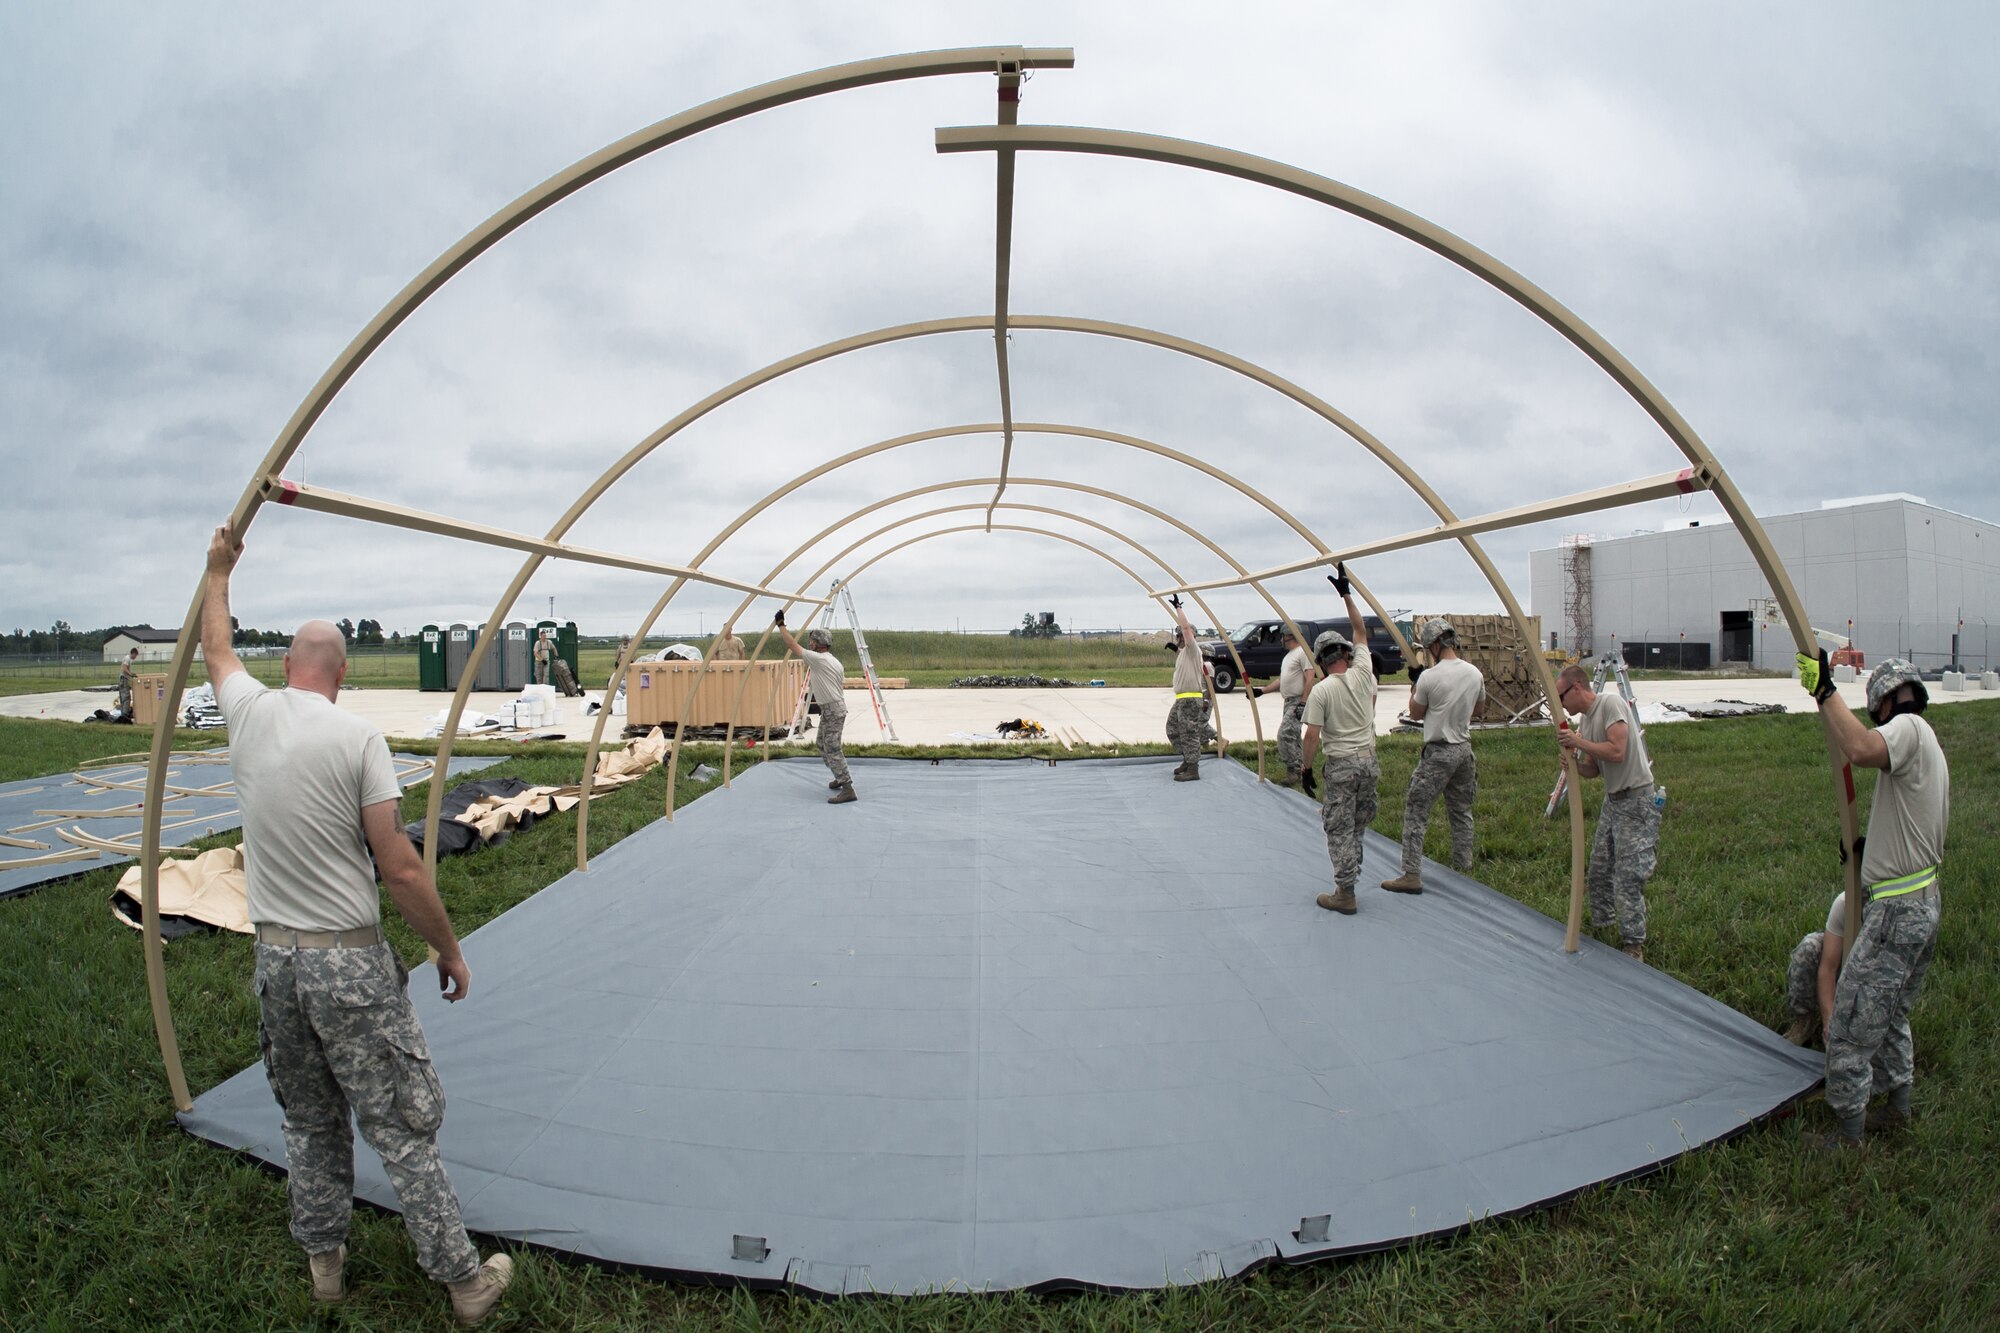 Airmen from the Kentucky Air National Guard’s 123rd Contingency Response Group and Soldiers from the U.S. Army’s active-duty 689th Rapid Port Opening Element from Fort Eustis, Va., erect Alaskan Shelter sleeping quarters at MidAmerica St. Louis Airport in Mascoutah, Ill., on Aug. 5, 2013, as part of Exercise Gateway Relief, a U.S. Transportation Command-directed earthquake-response scenario. The two units are joining forces to stand up and operate a Joint Task Force-Port Opening, which combines an Air Force Aerial Port of Debarkation with an Army trucking and distribution unit. The aerial port ensures the smooth flow of cargo and relief supplies into affected areas by airlift, while the trucking unit facilitates their final distribution over land. (U.S. Air National Guard photo by Maj. Dale Greer)